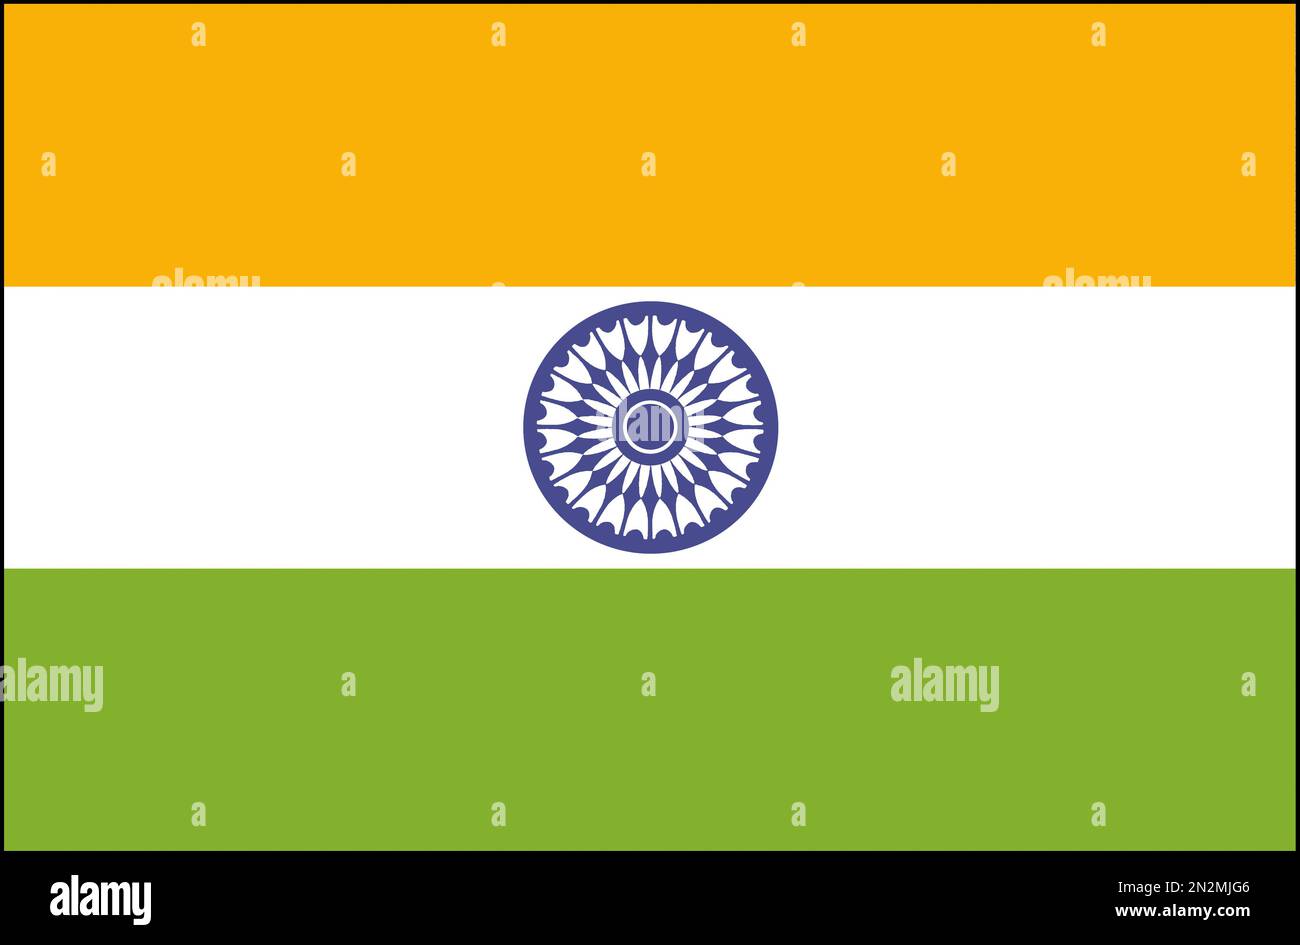 Flagge Wappen Fahne Nationalfahne Nationalflagge Indien Stock Photo